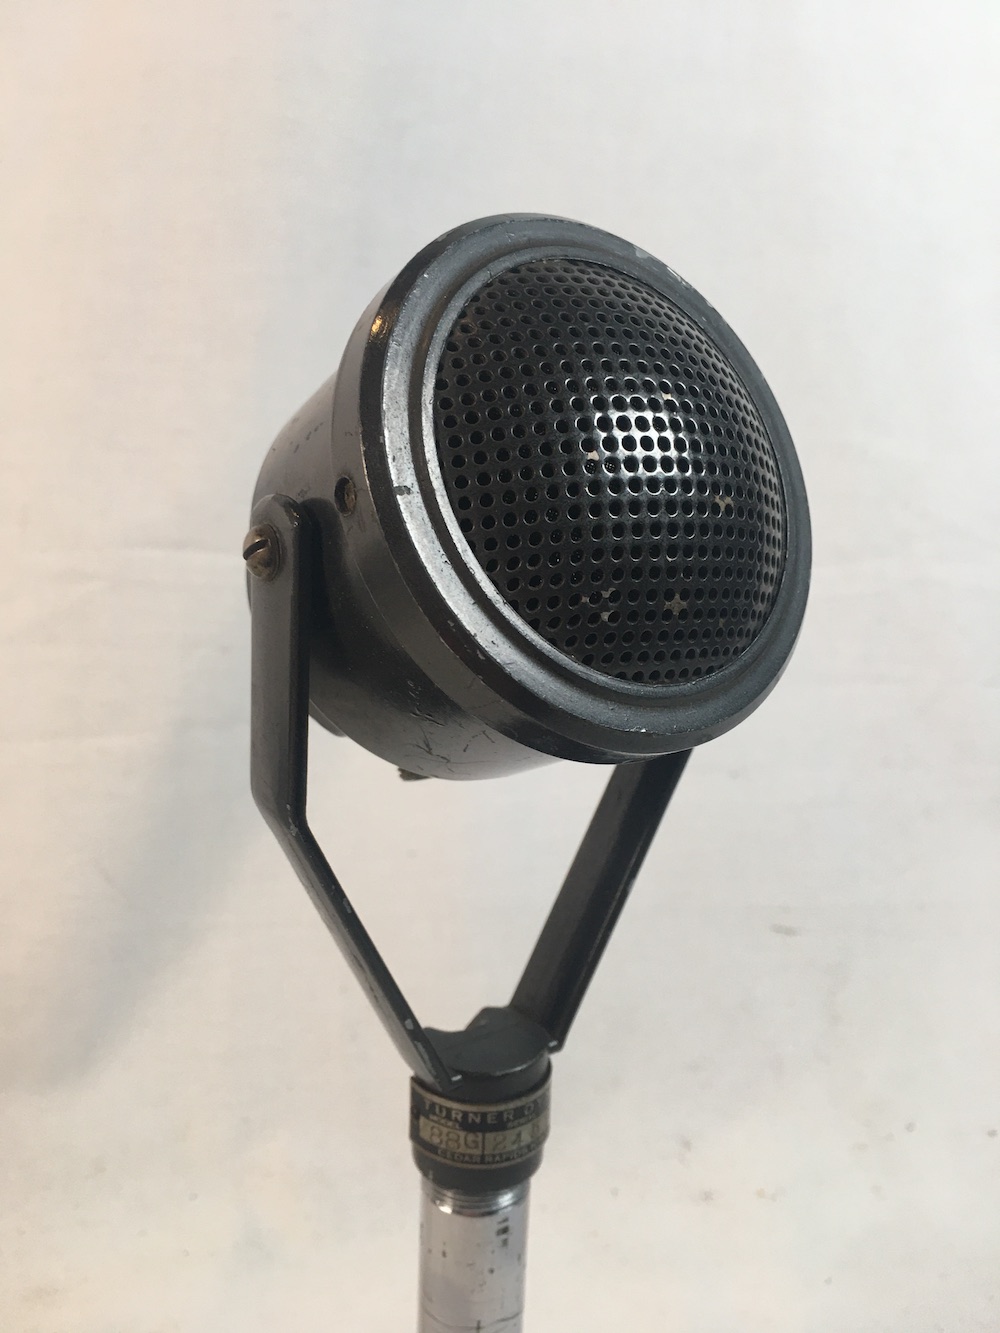 Turner 88G Microphone Vintage Dynamic Single Conductor RARE!!! Vocals